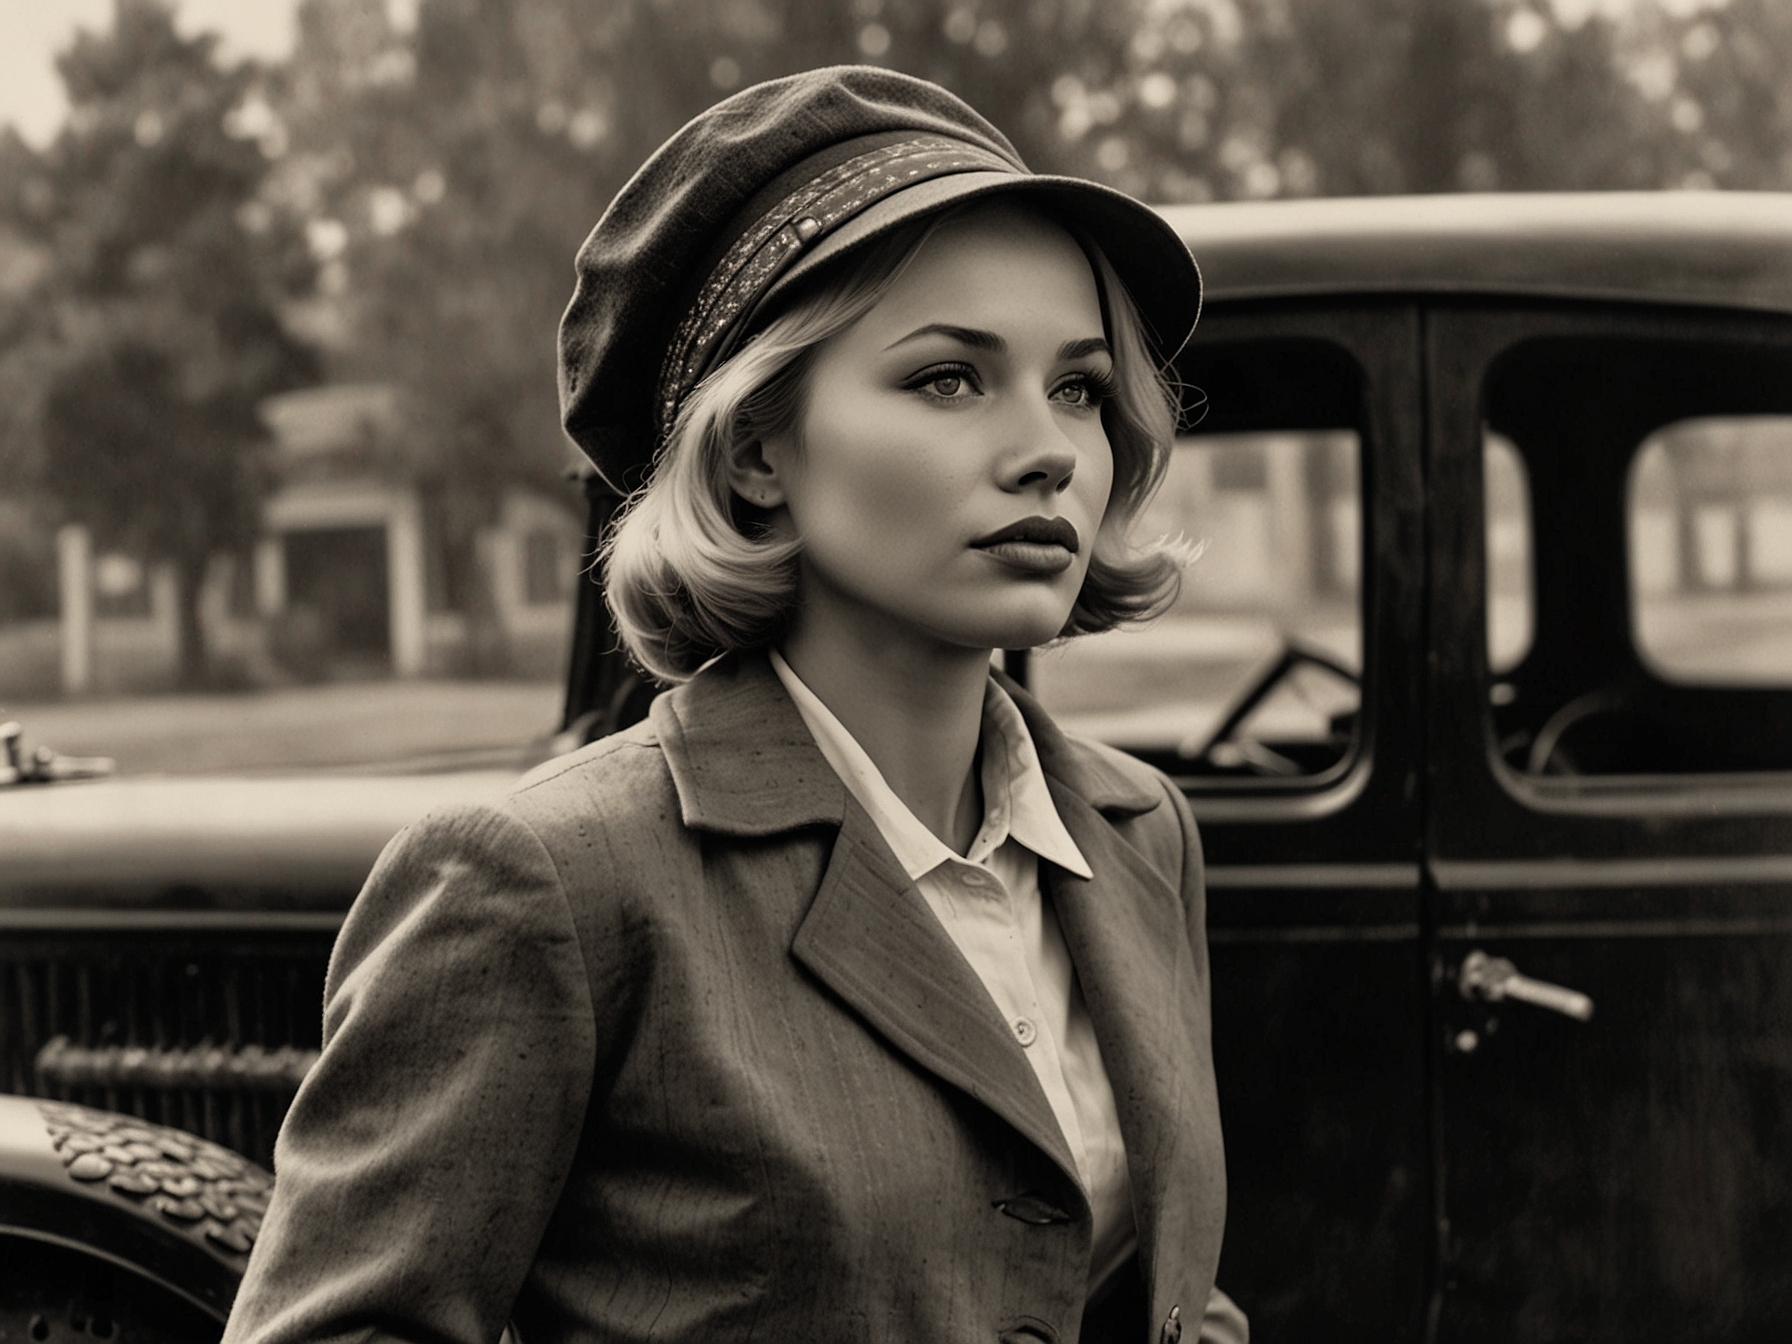 Evans Evans in her iconic role as Blanche Barrow in the 1967 film 'Bonnie and Clyde.' The image captures a defining moment from the film, showcasing her memorable performance.